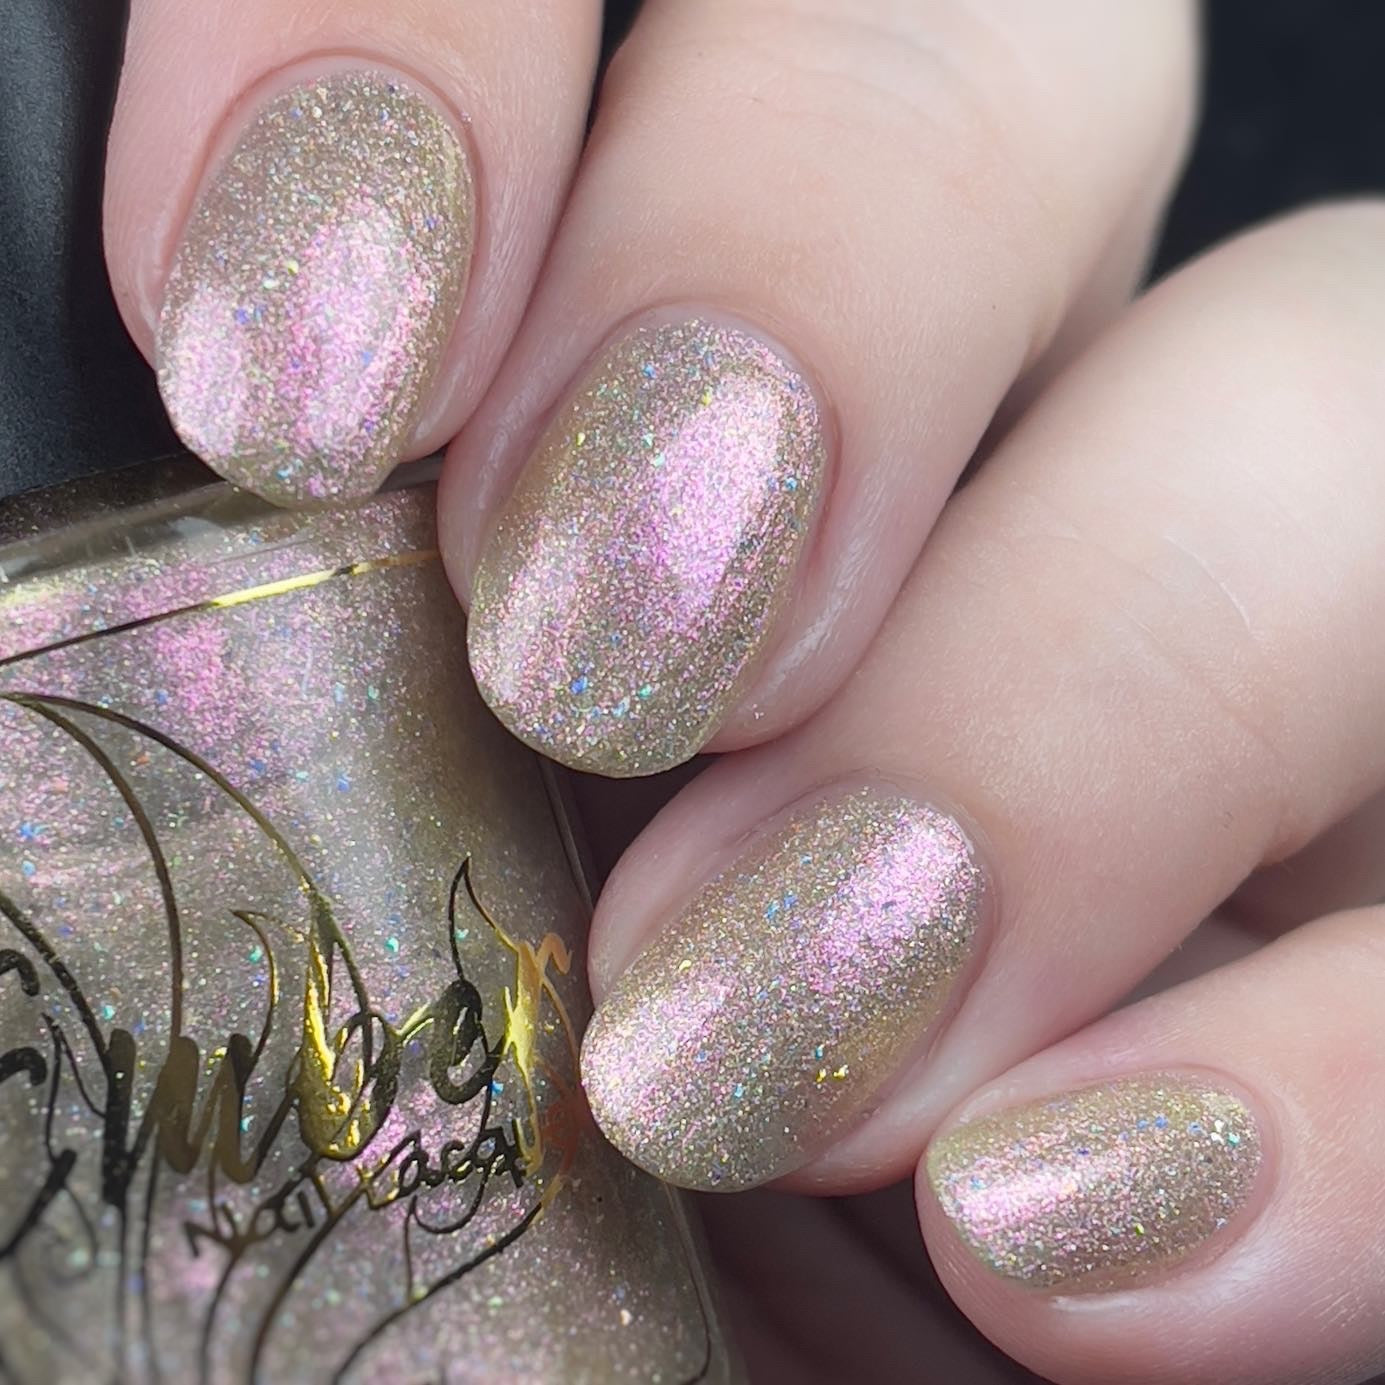 short nails get attention too with Back Flip Nude's gold glitter and pink holographic surprise